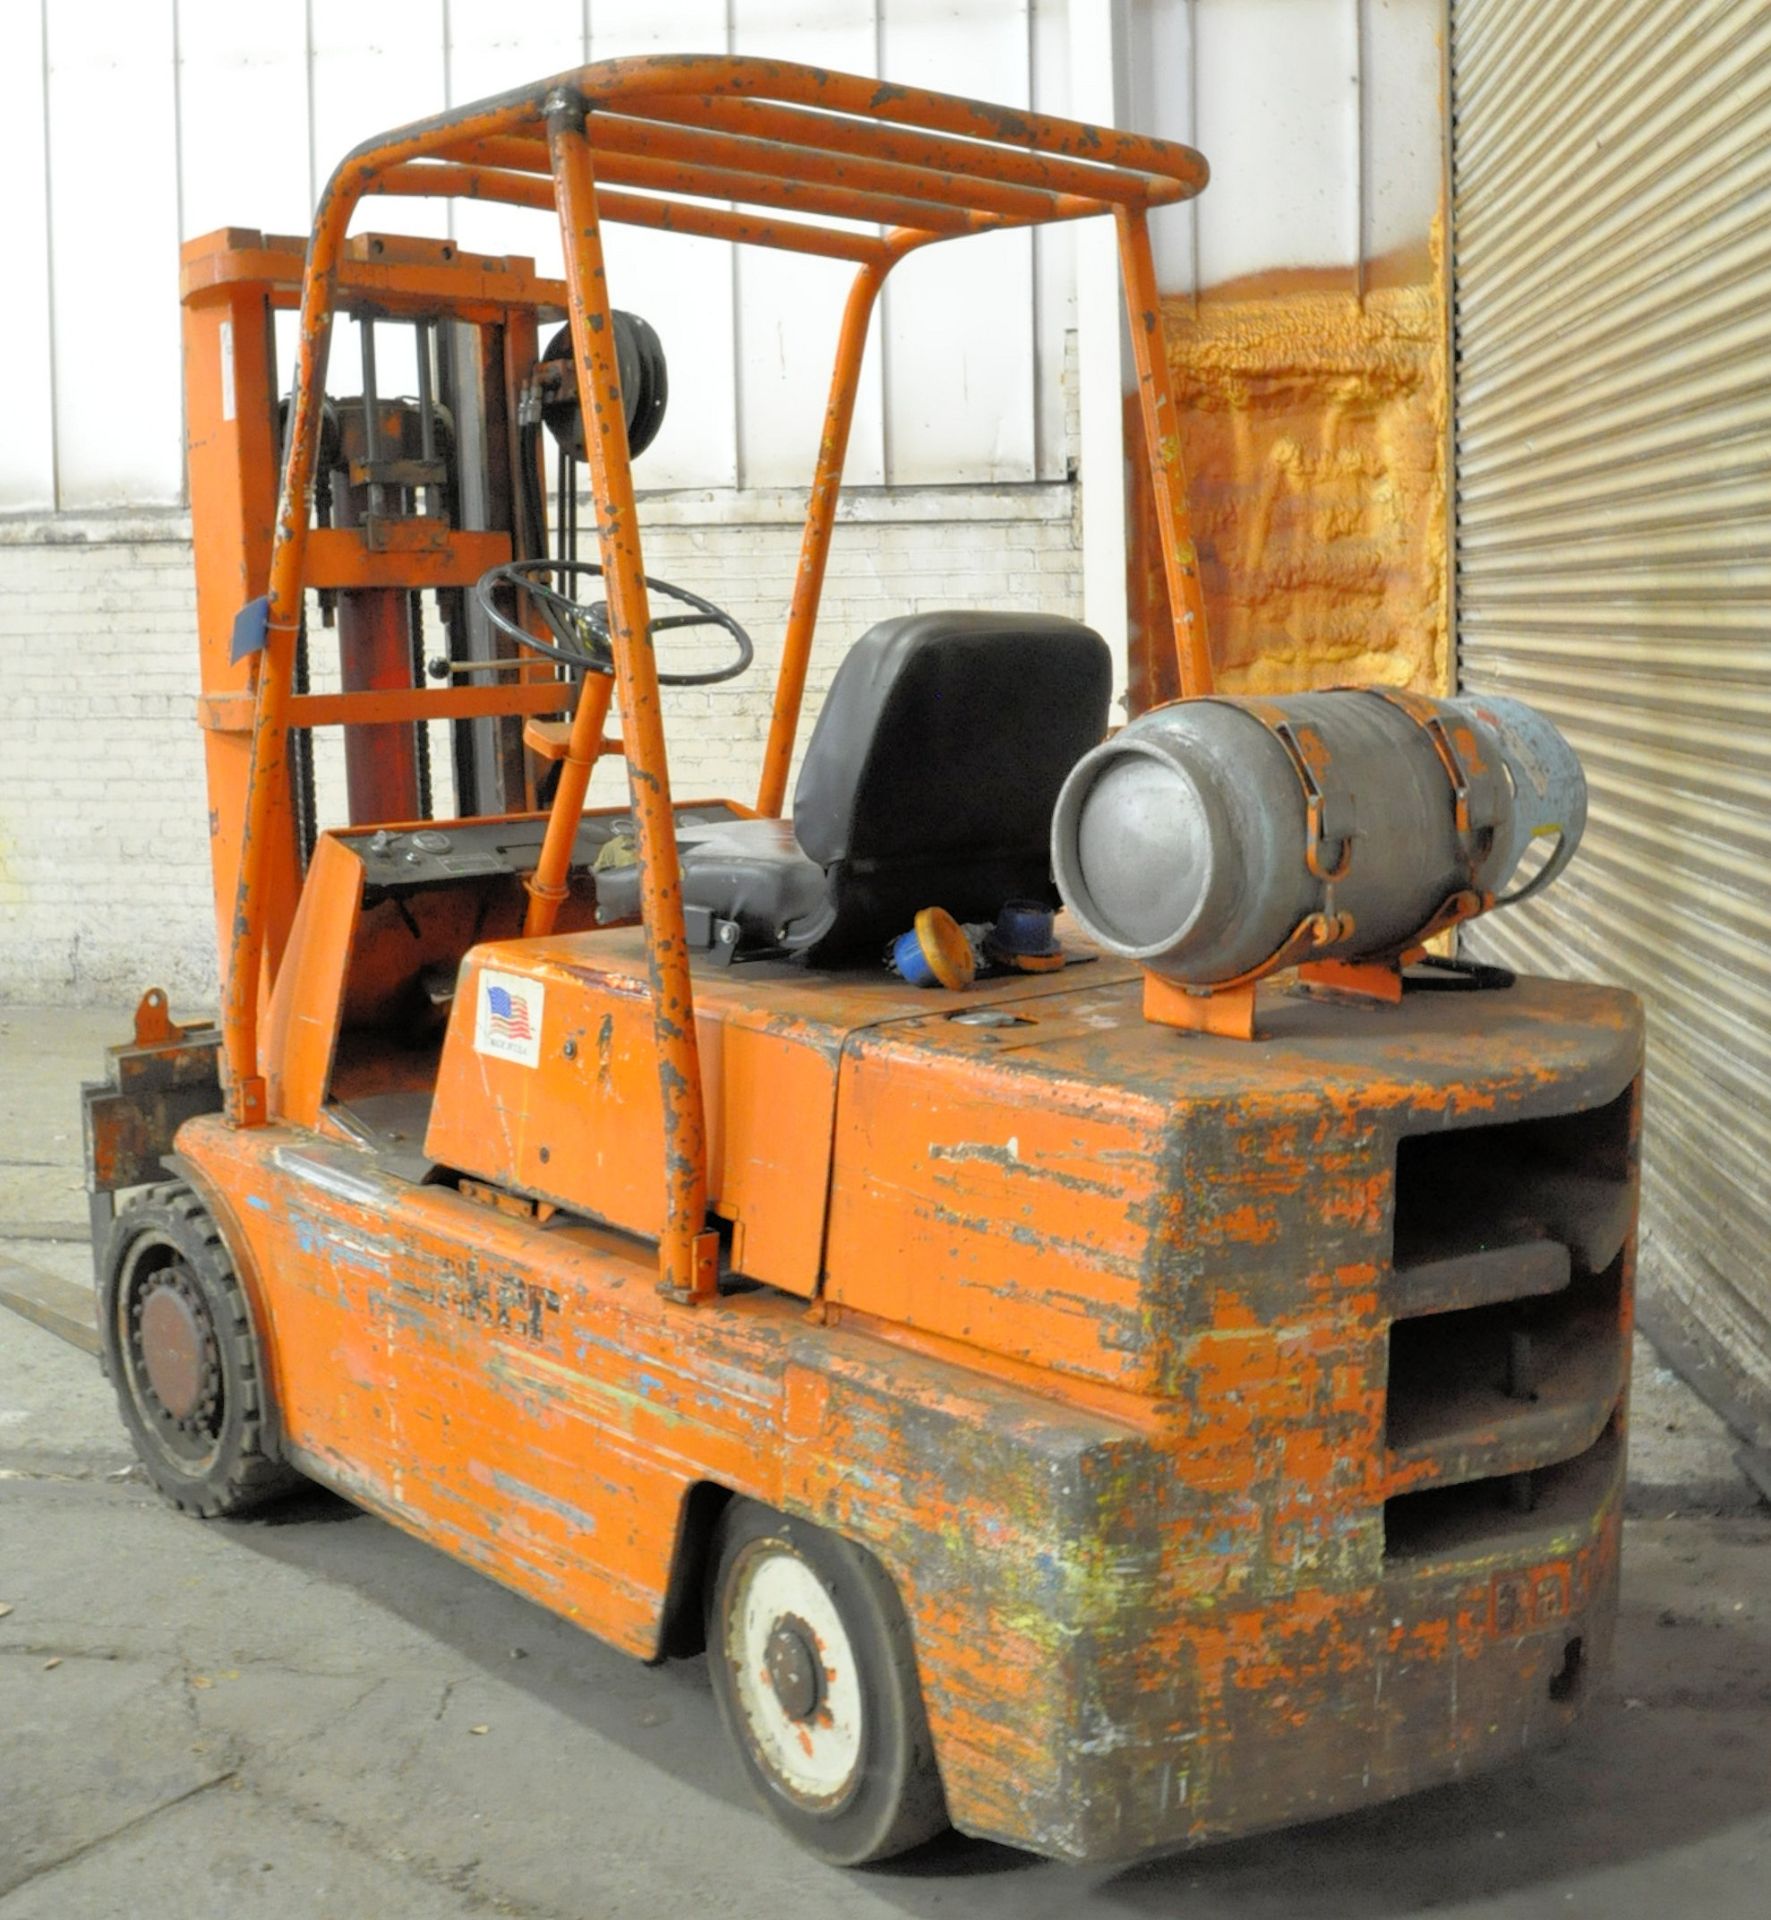 BAKER Approx. 3,000-Lbs. x 156" Lift Capacity LP Gas Forklift Truck, 2-Stage Mast, Side Shift - Image 2 of 6